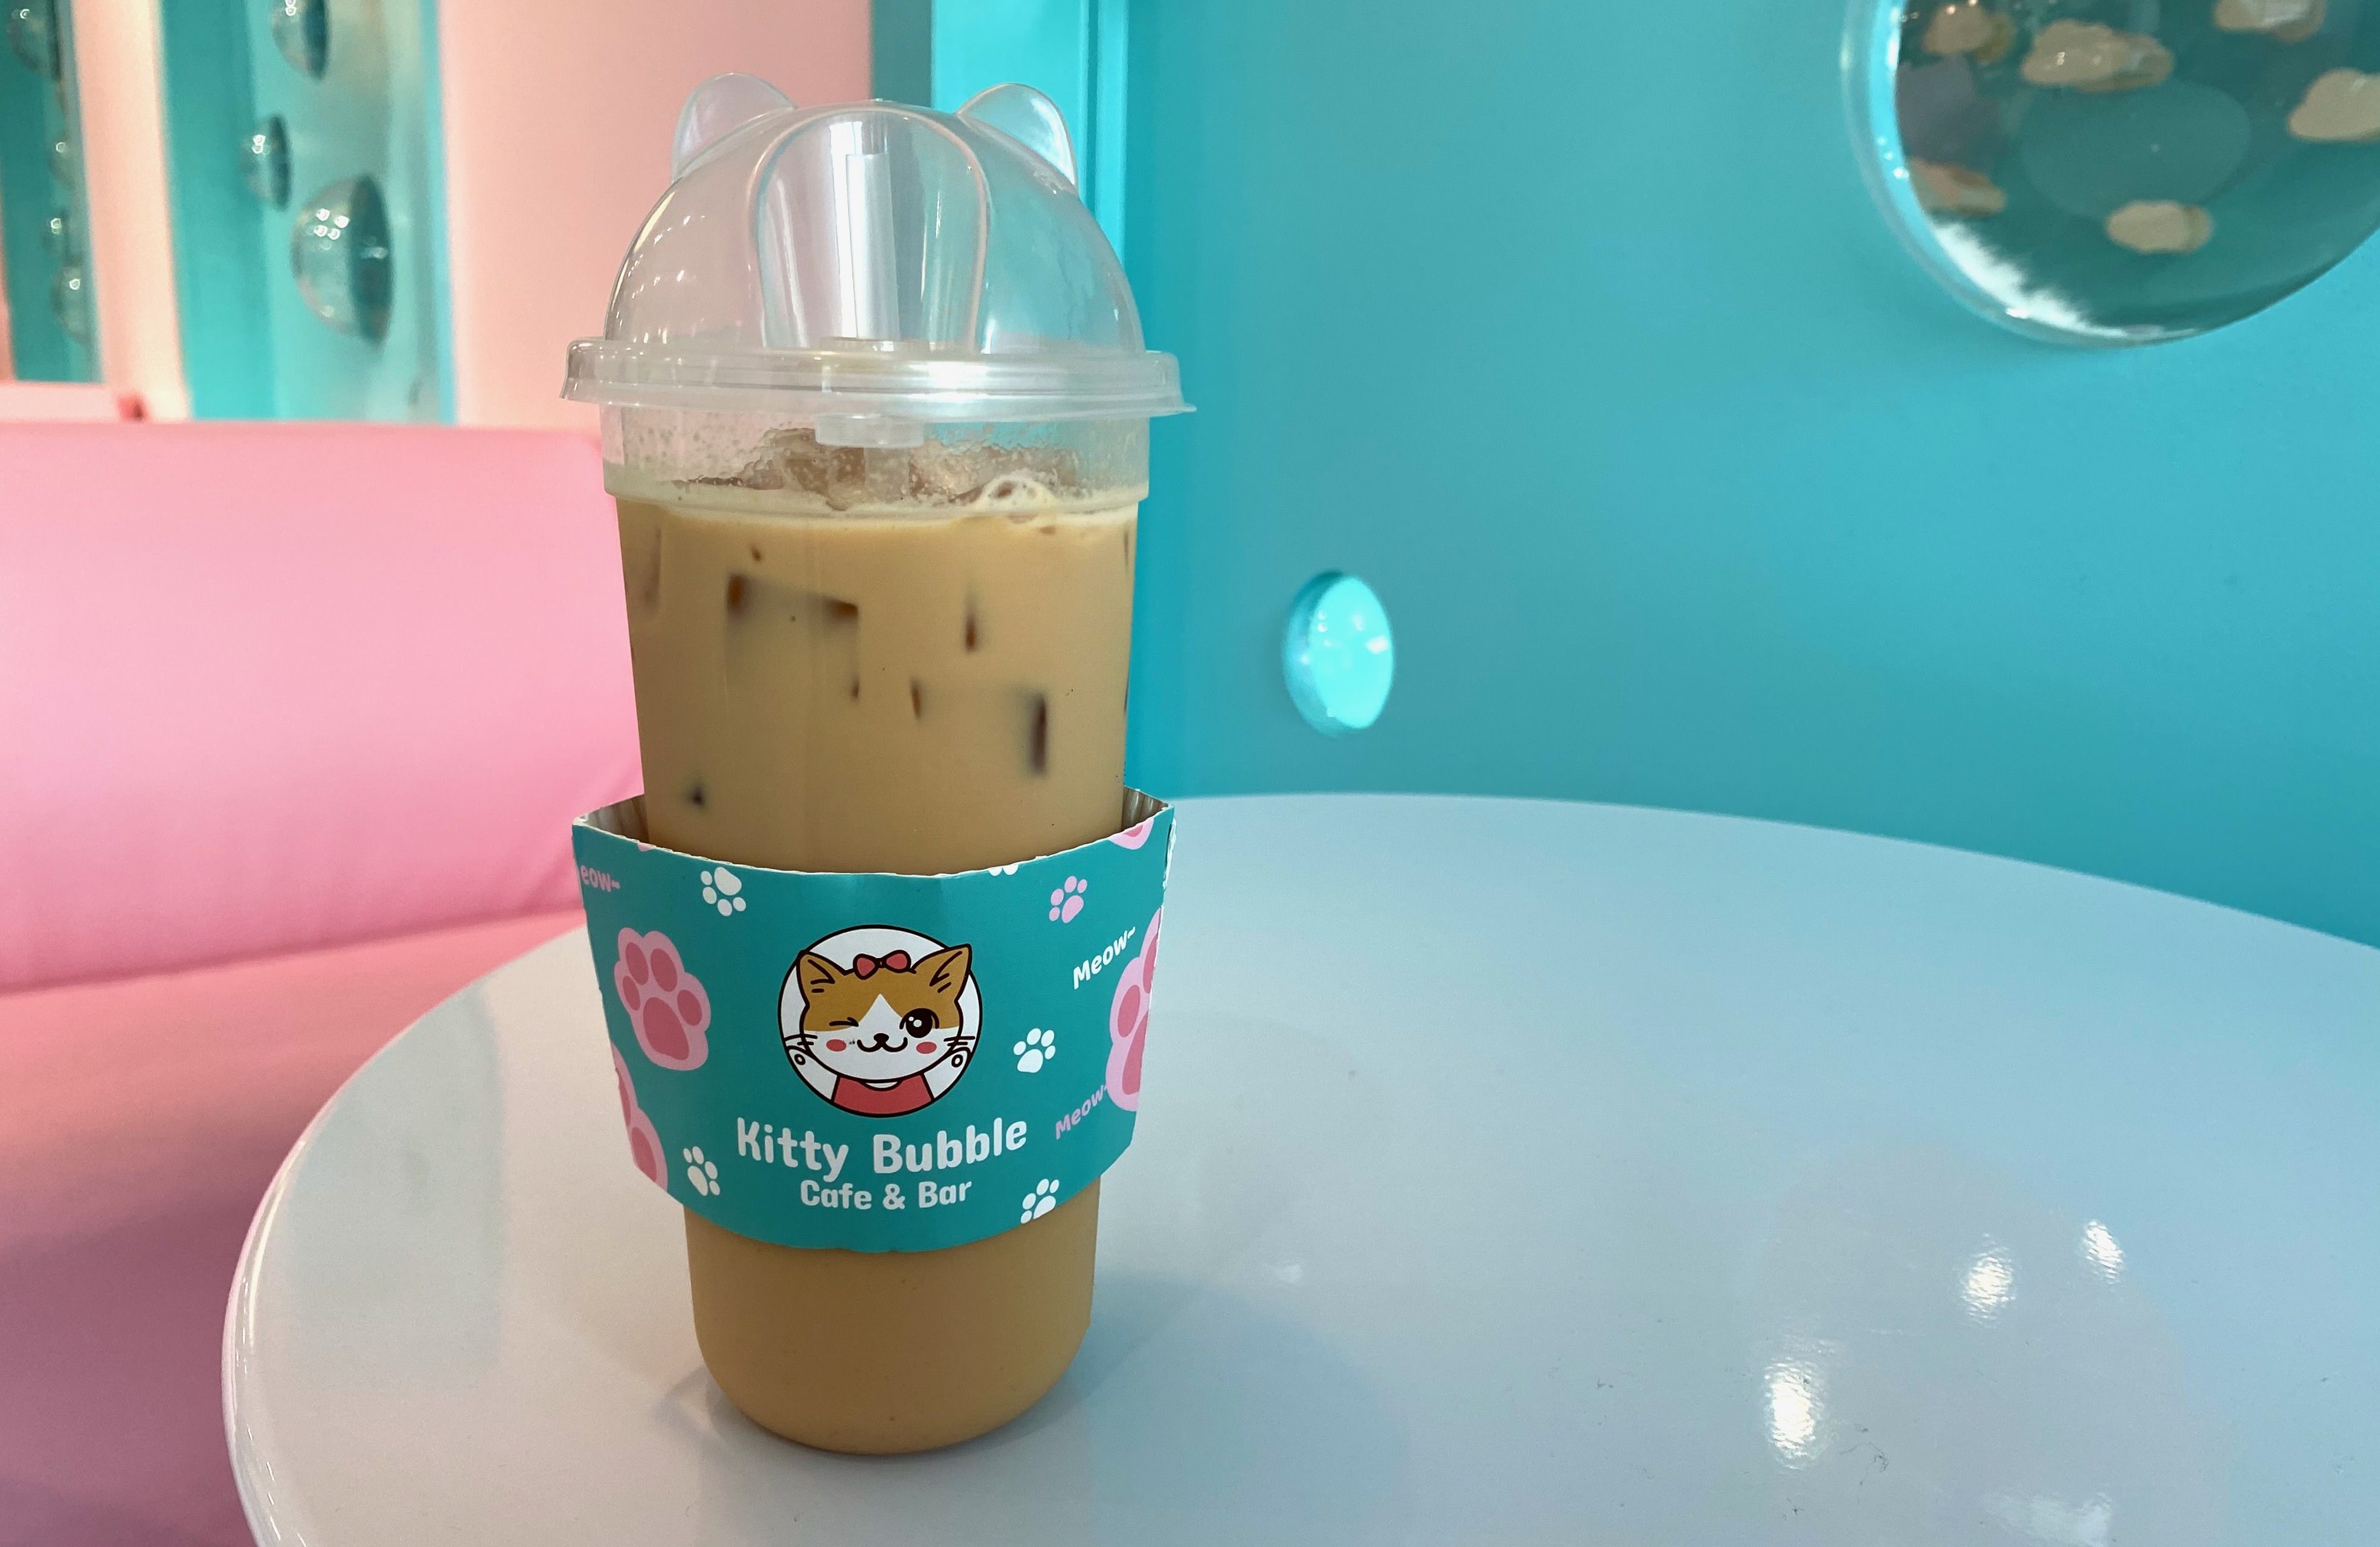 A plastic coffee cup with cat ears on top and a "Kitty Bubble Cafe & Bar" sleeve on it